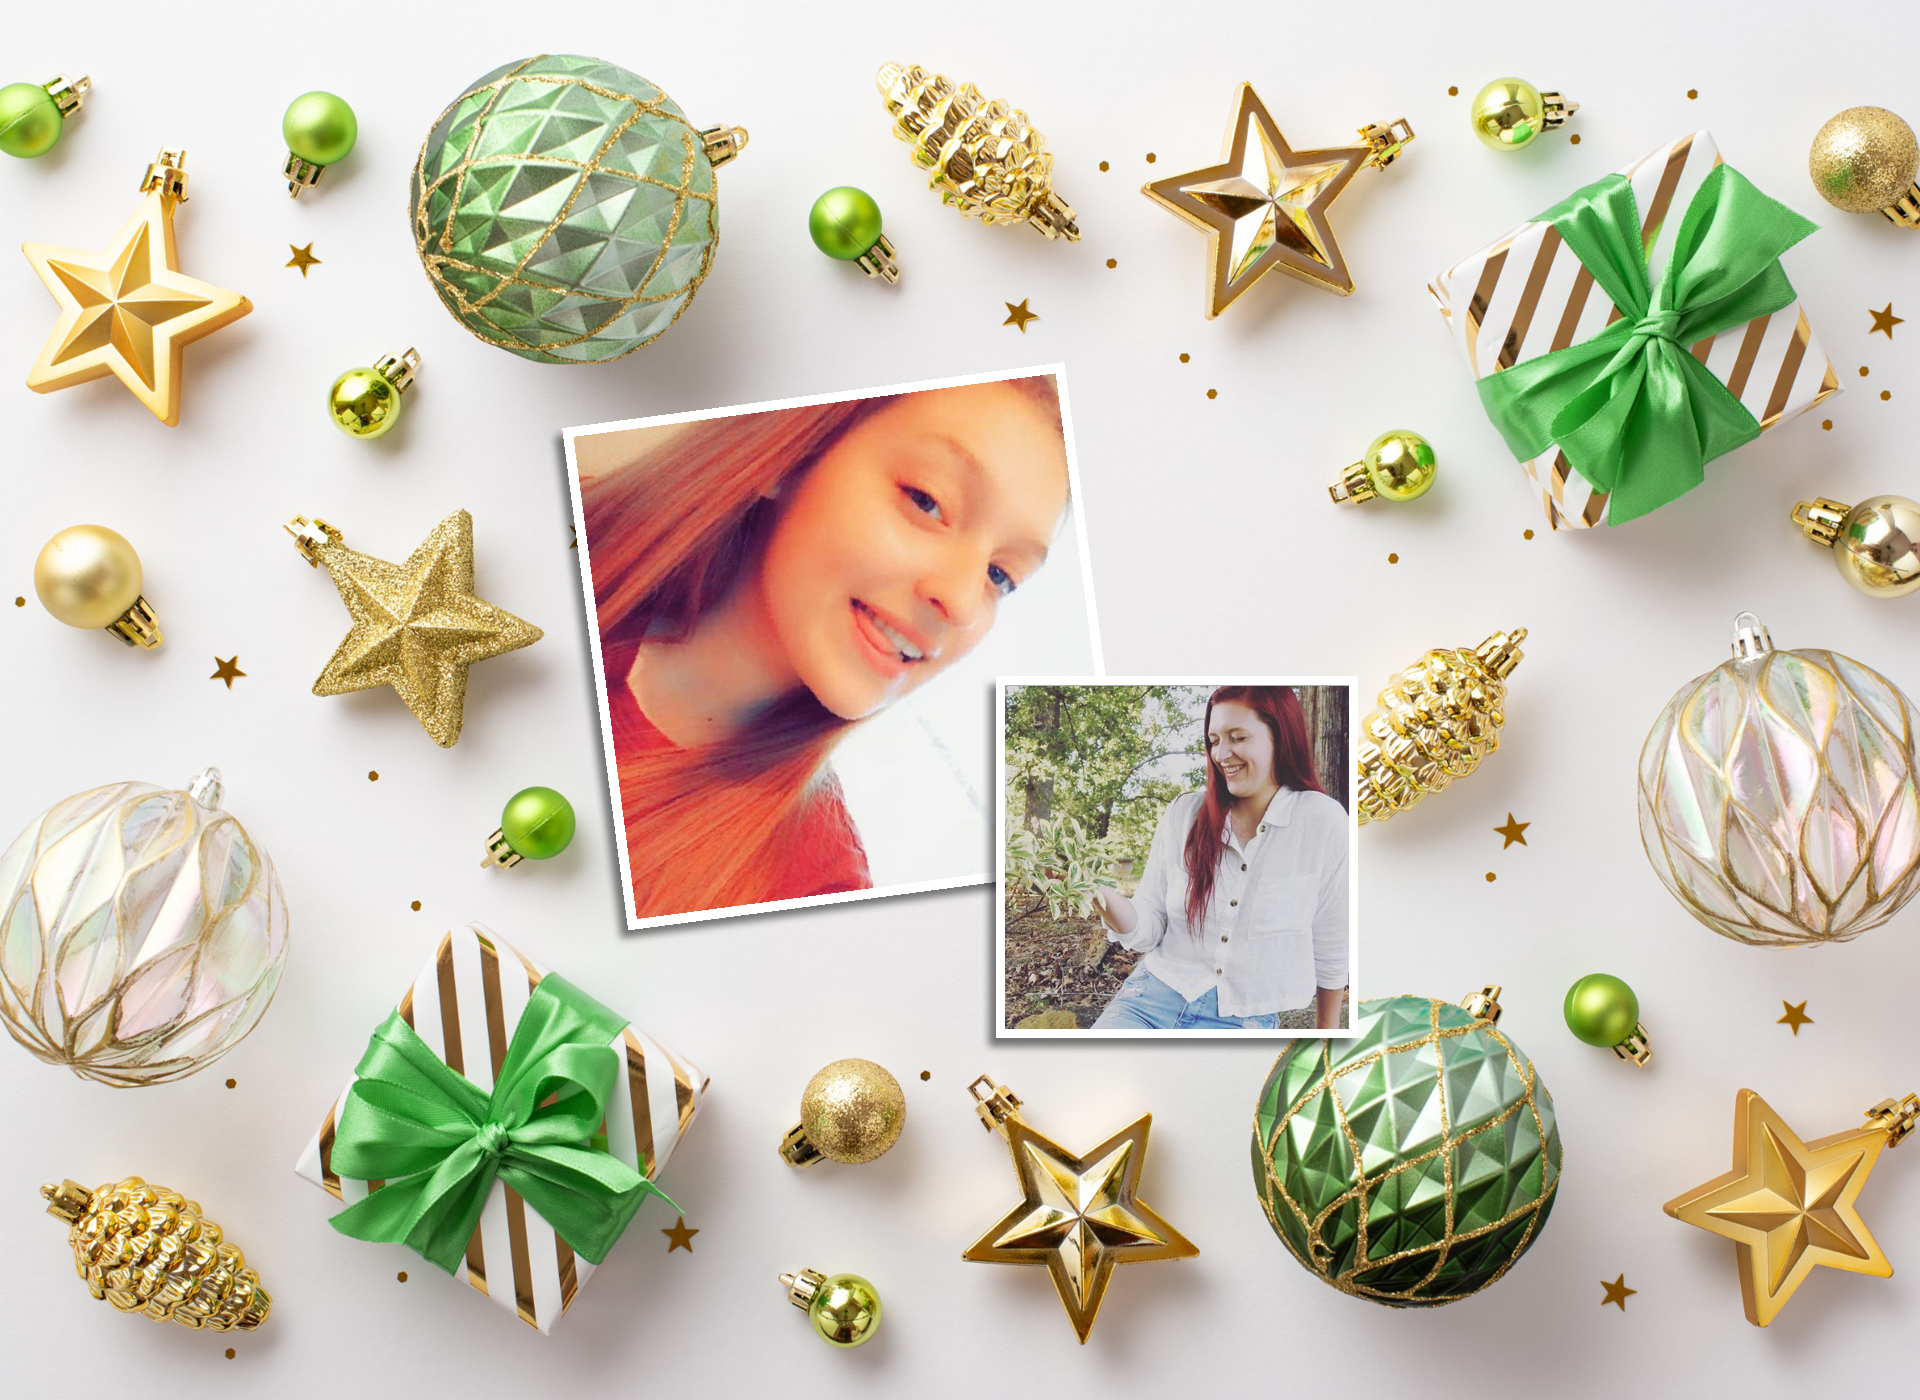 Images of Maya with christmas ornaments